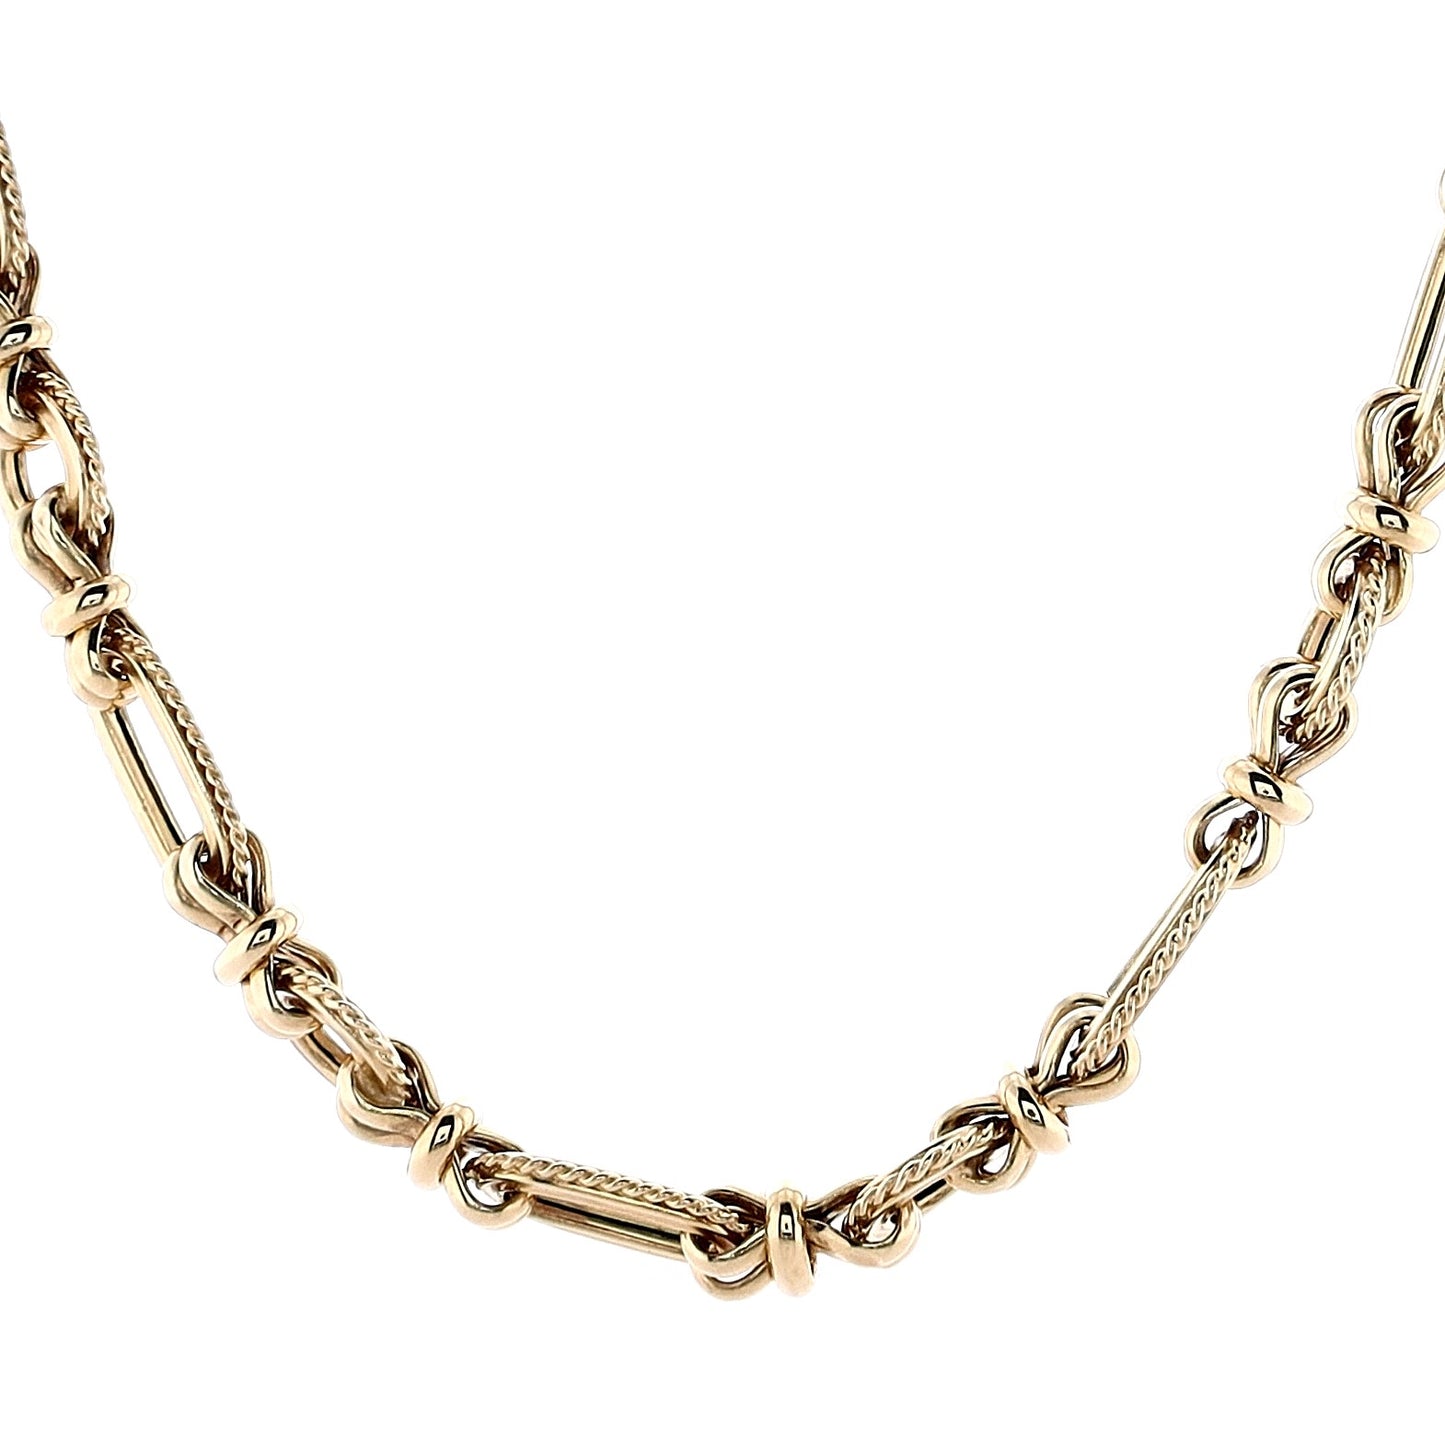 Estate 14 Karat Yellow Gold Round and Oval Twisted Edge Link Design 17" Necklace